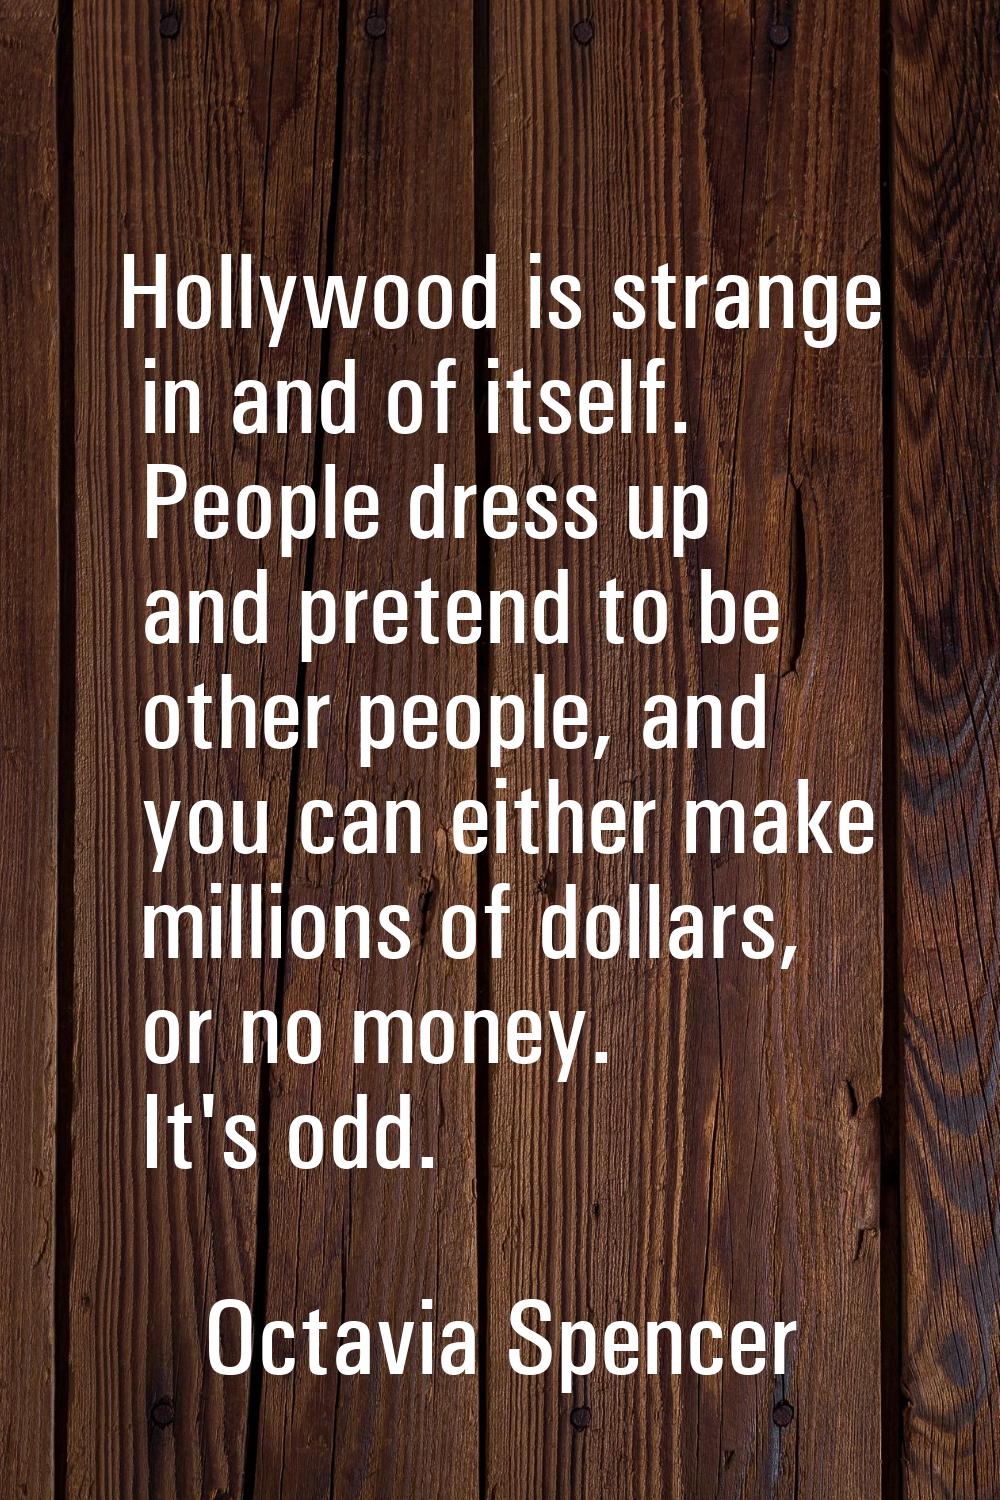 Hollywood is strange in and of itself. People dress up and pretend to be other people, and you can 